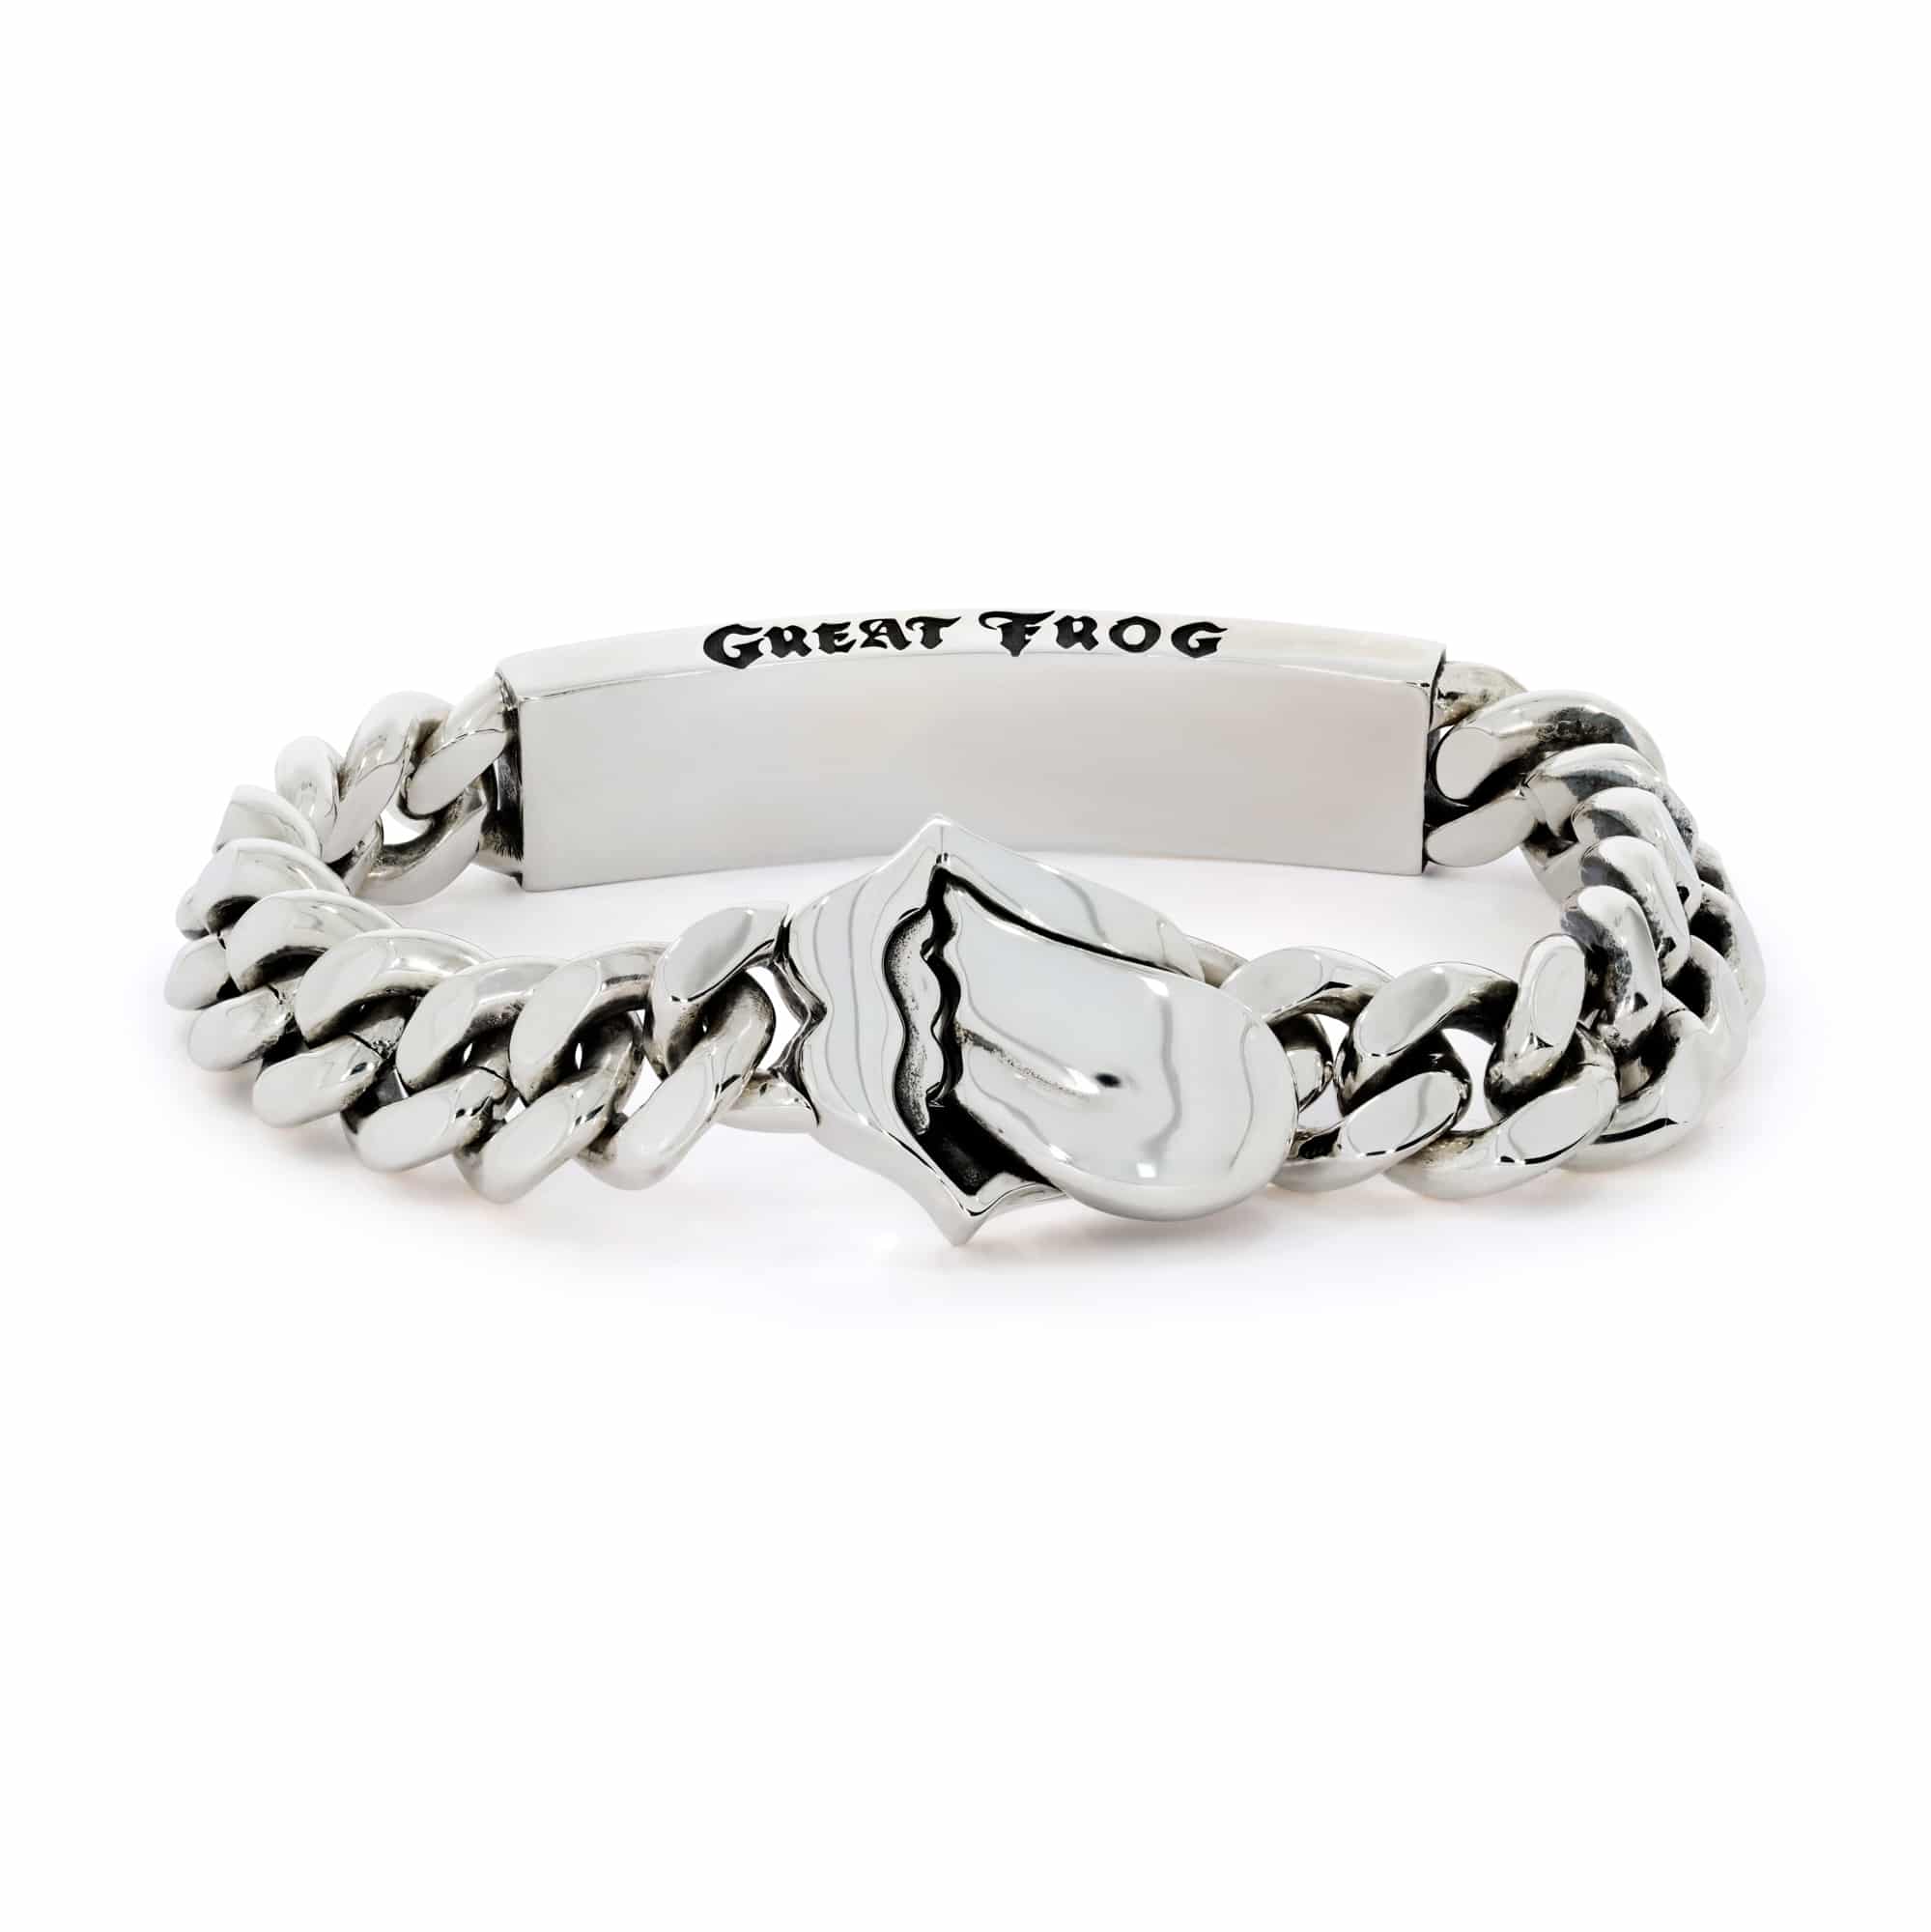 The Great Frog Official Website